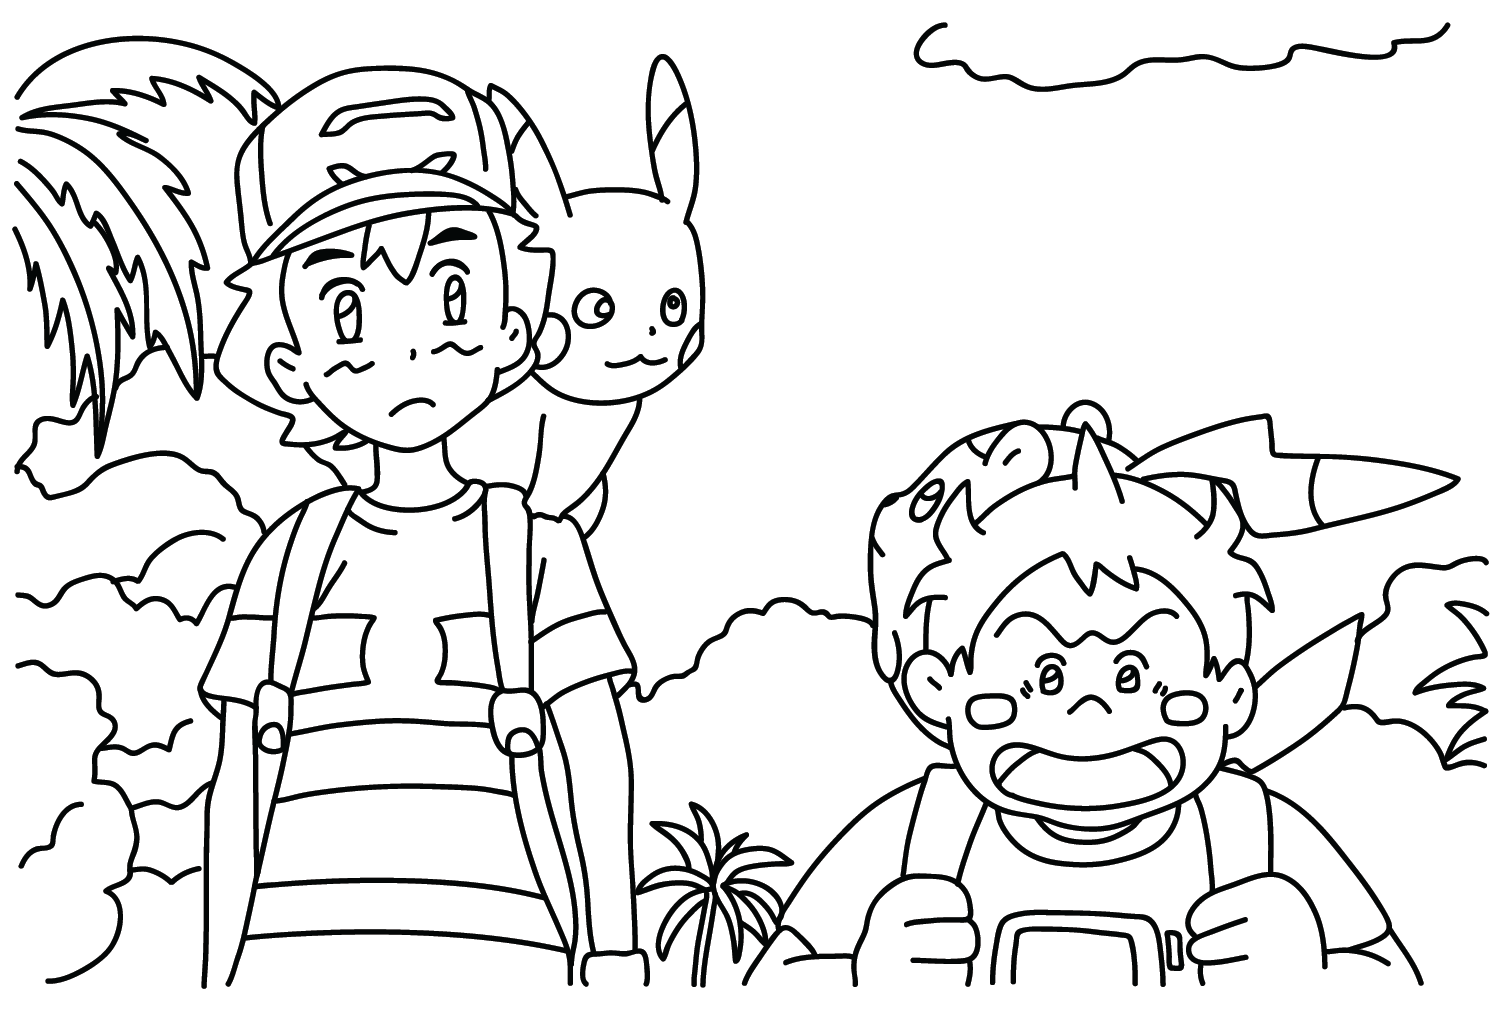 Ash, Sophocles Pokemon Coloring Page from Ash Ketchum